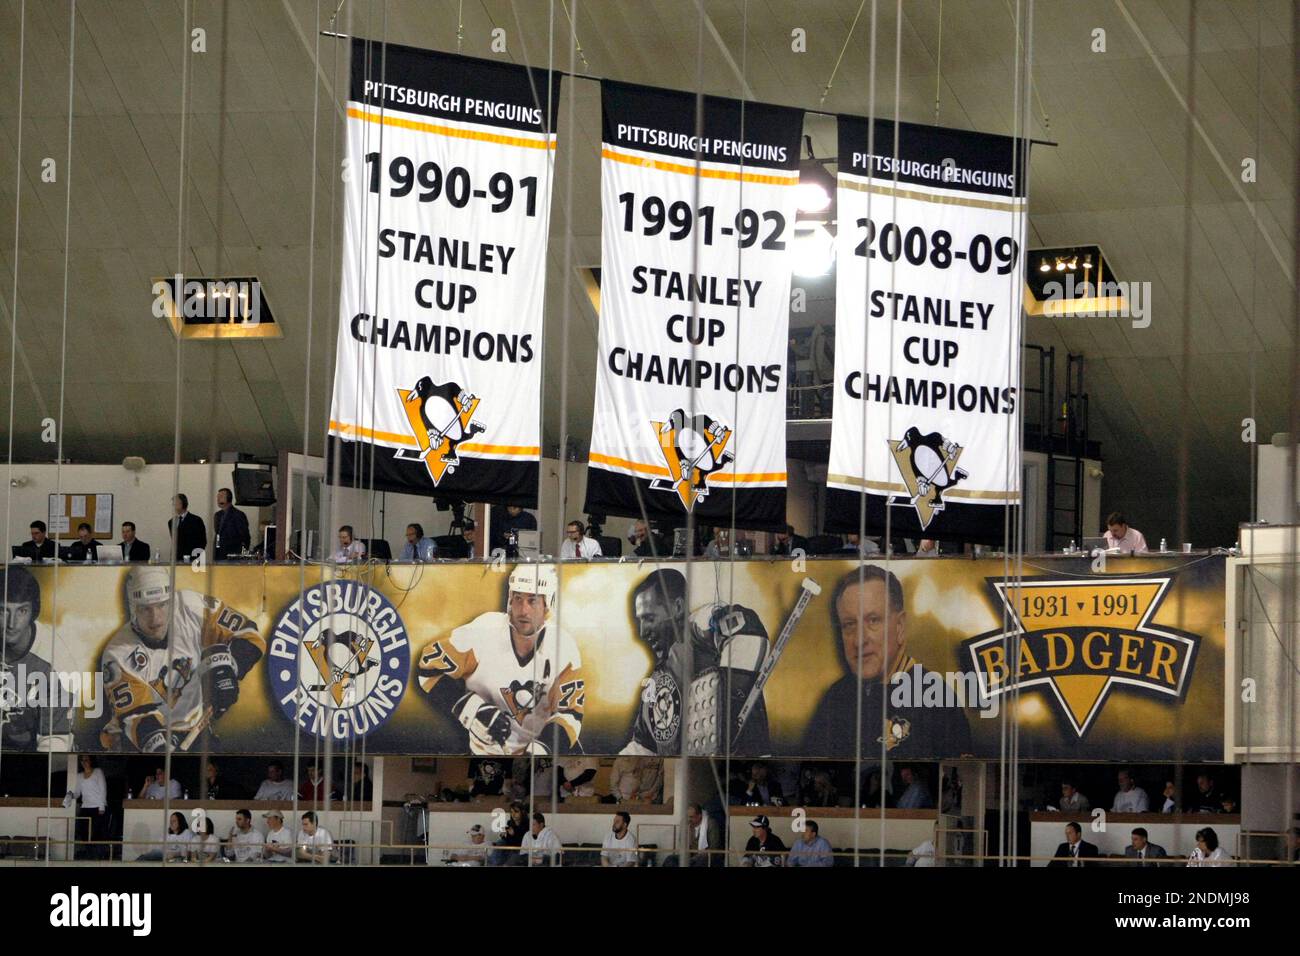 The Stanley Cup. ^-^  Stanley cup, Pittsburgh penguins hockey